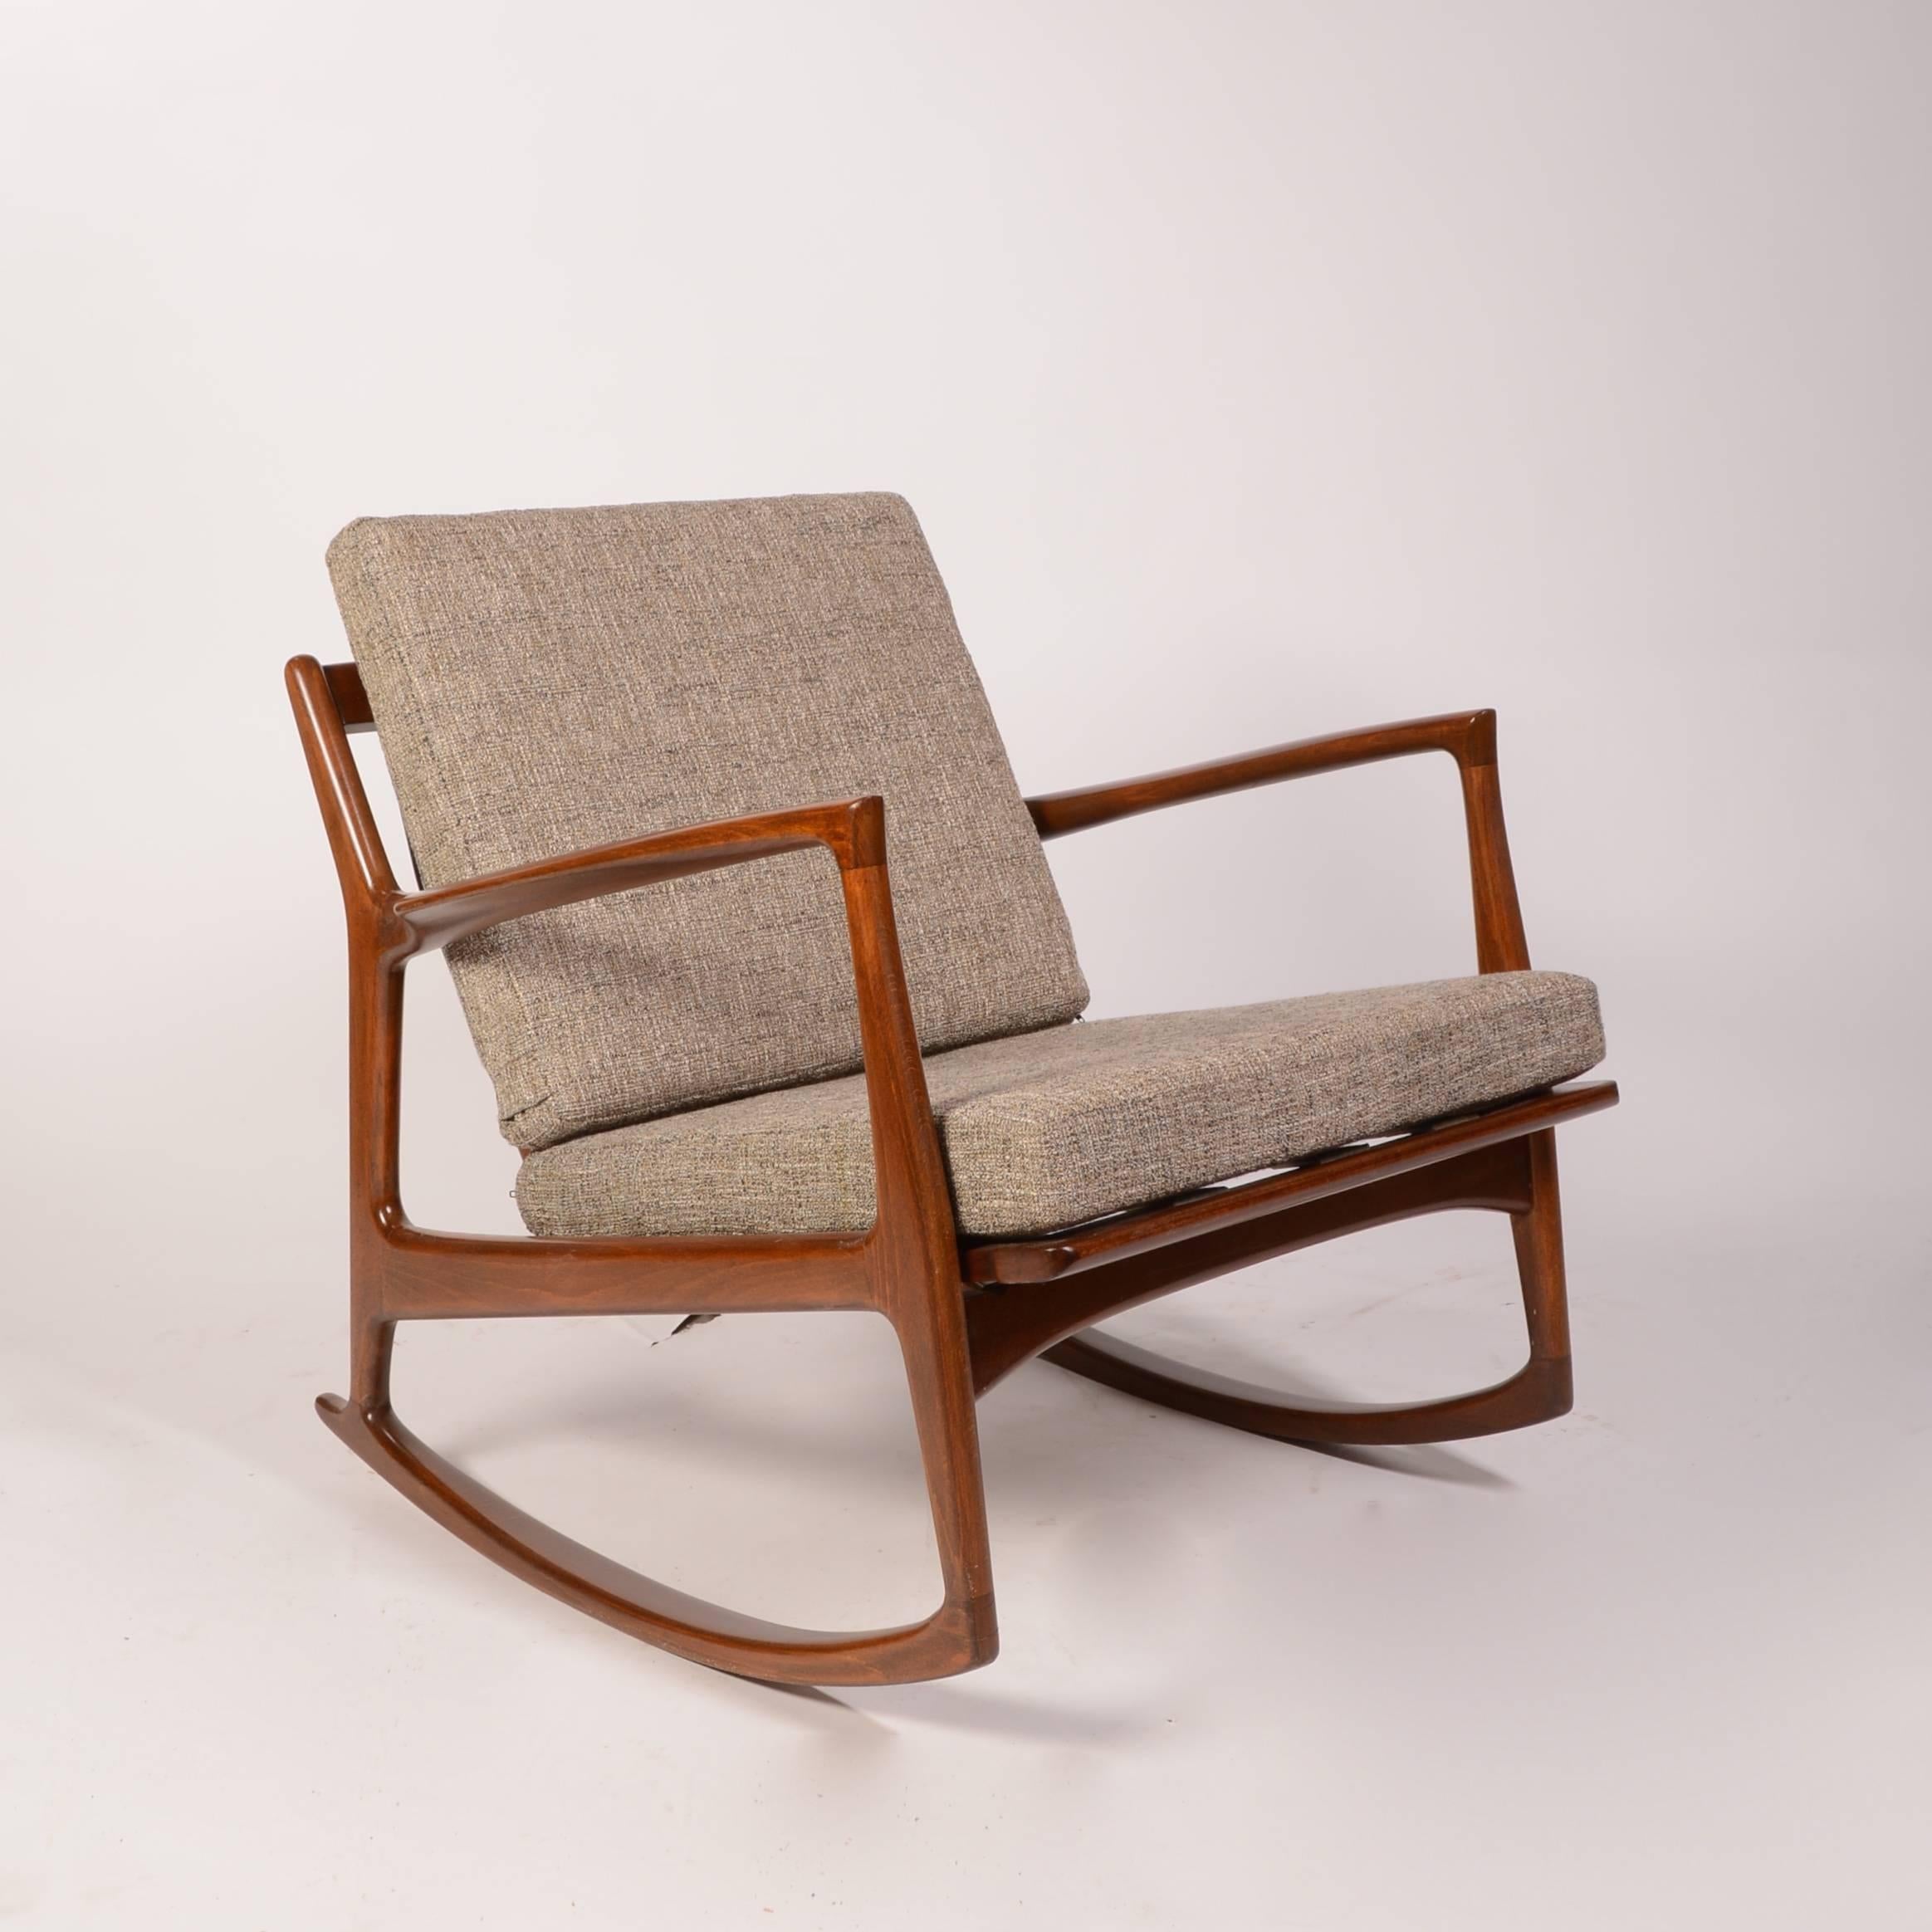 A gorgeous low back rocking chair designed by Kofod-Larsen and produced by Selig in Denmark in the 1960s. 

Solid walnut frame. This rocking chair has the Selig medallions maker's mark. Includes new cushions. 

The seat webbing as been newly